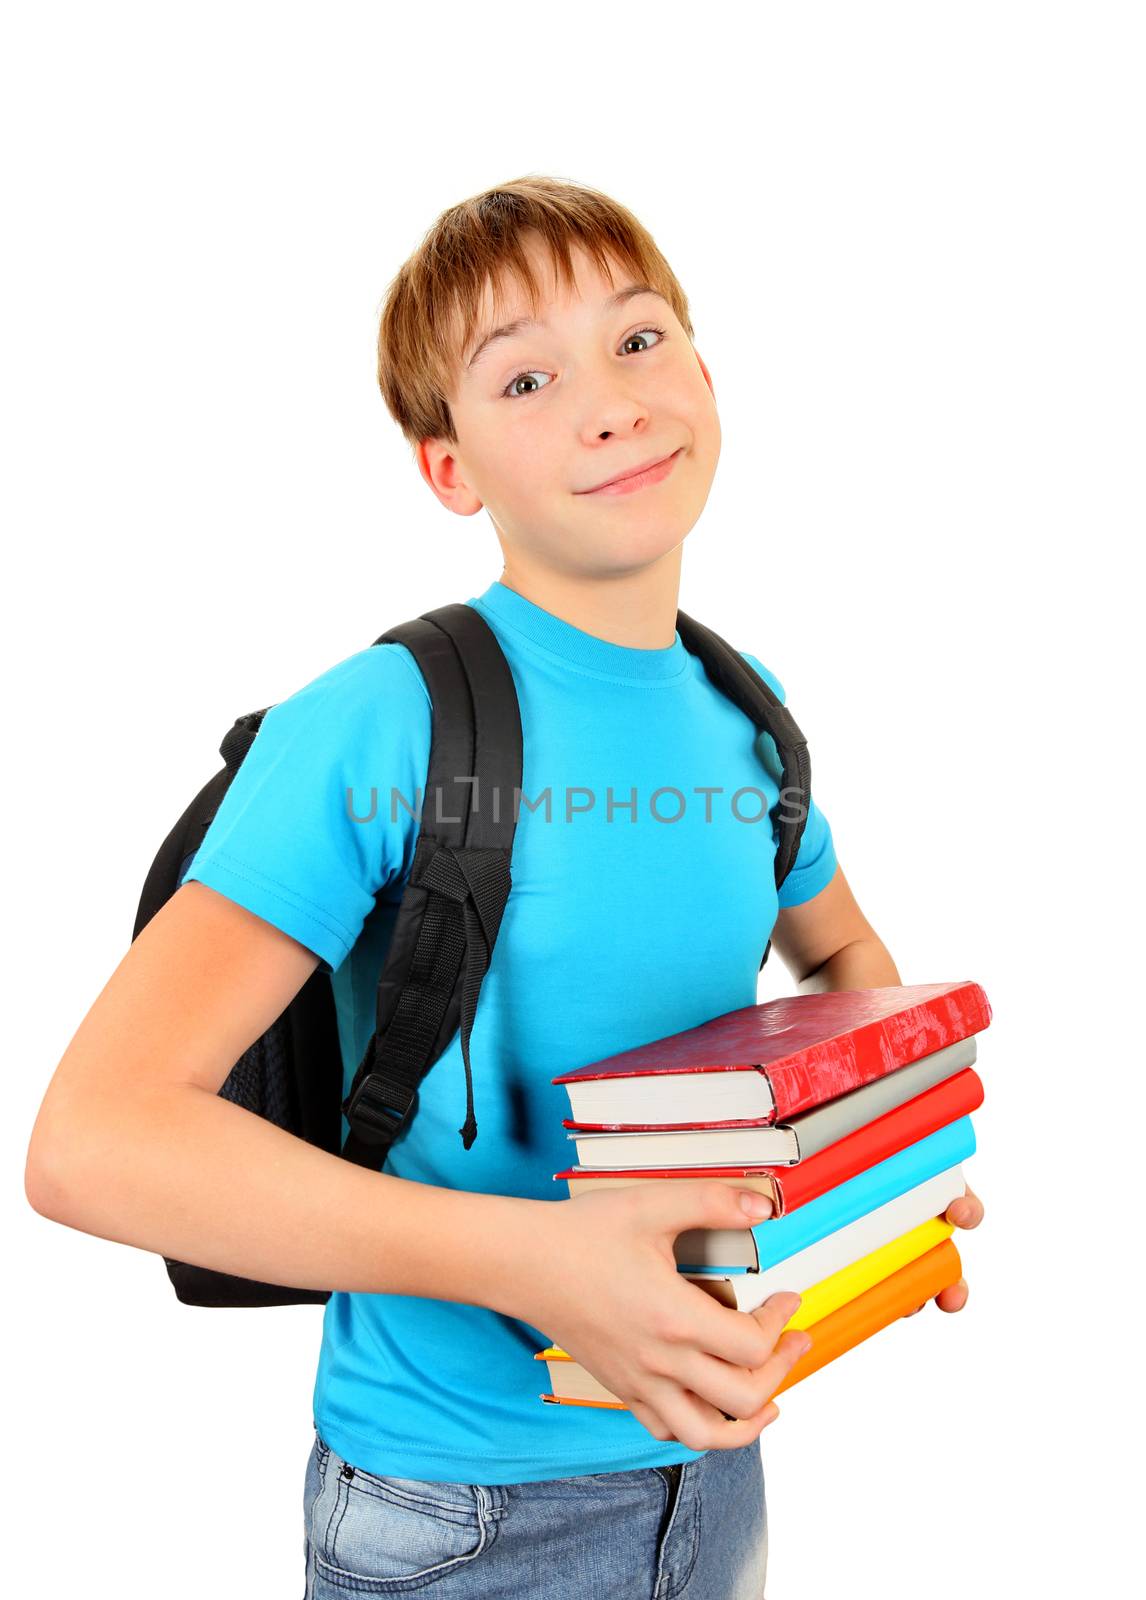 Kid with the Books Isolated on the White Background